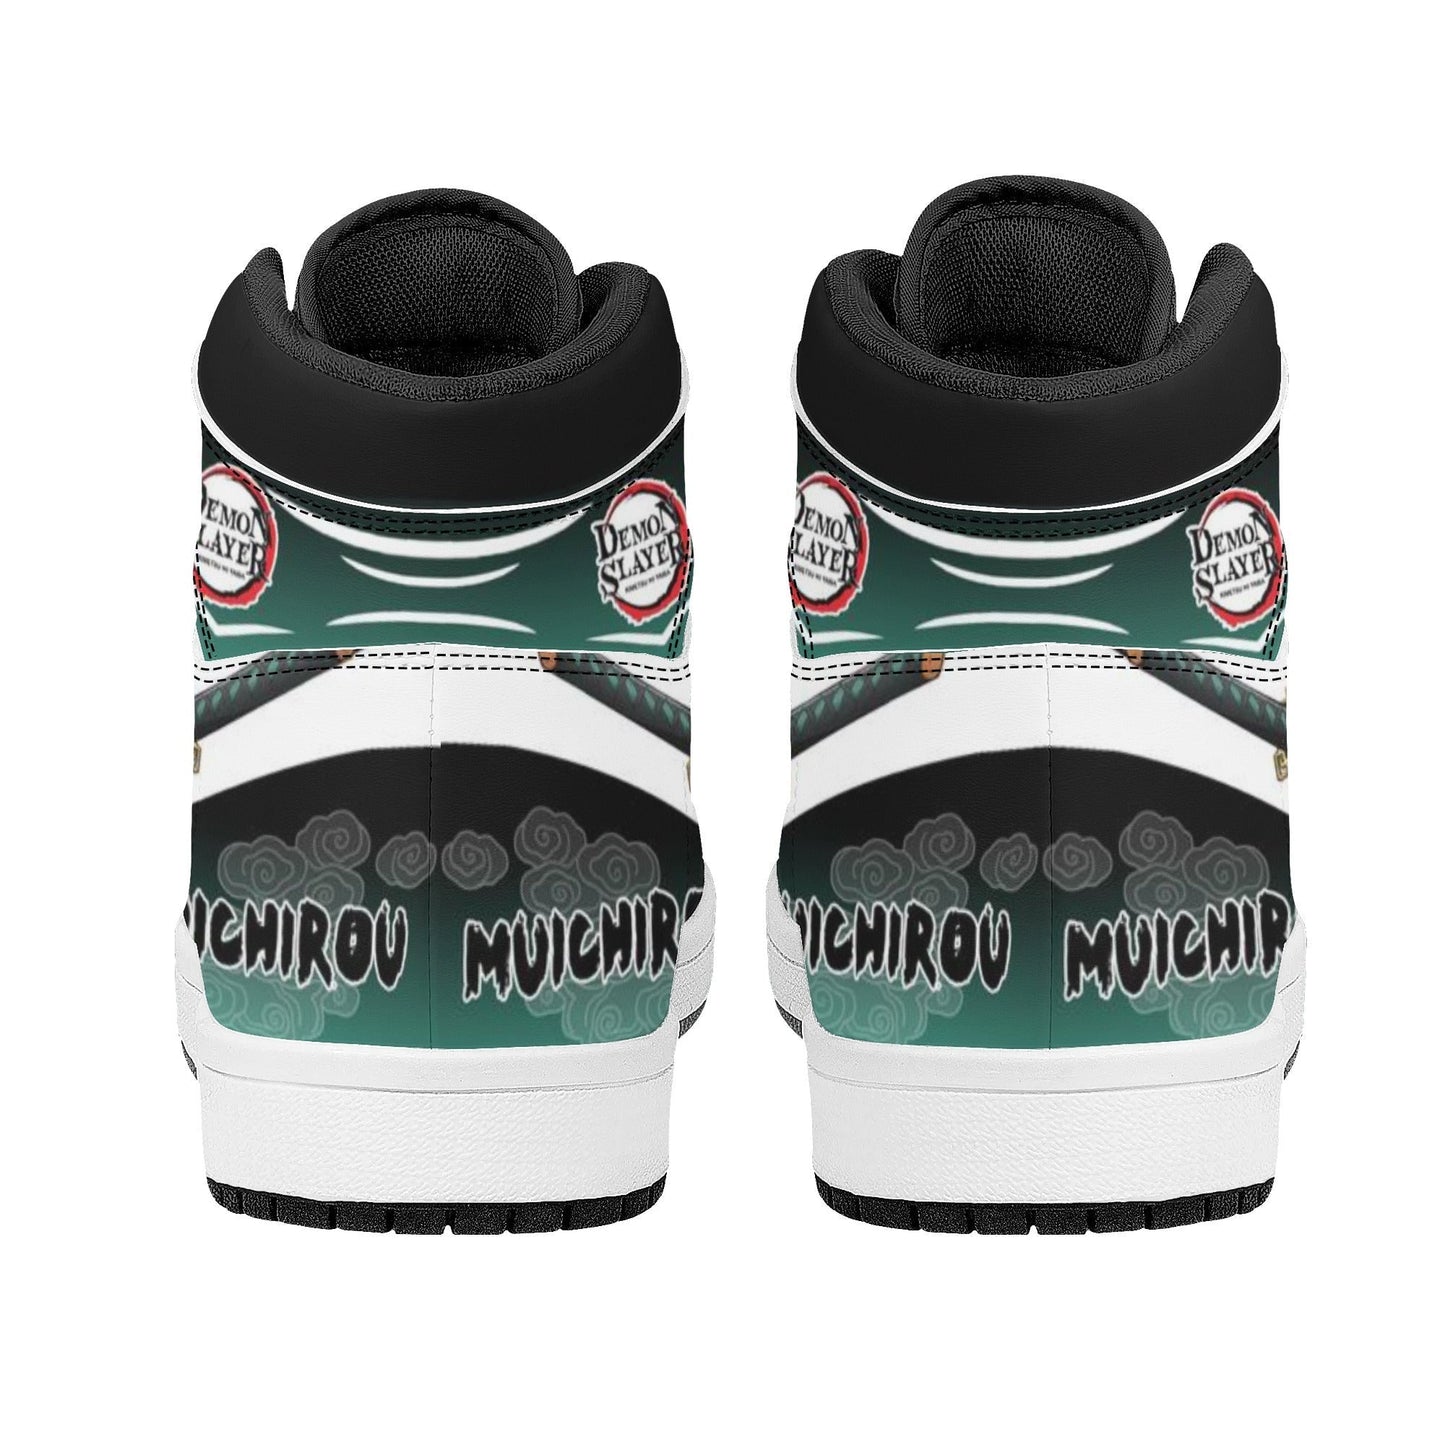 Tokitou Muichirou comfortable casual sports shoes（Size is American size, other countries please contact customer service）